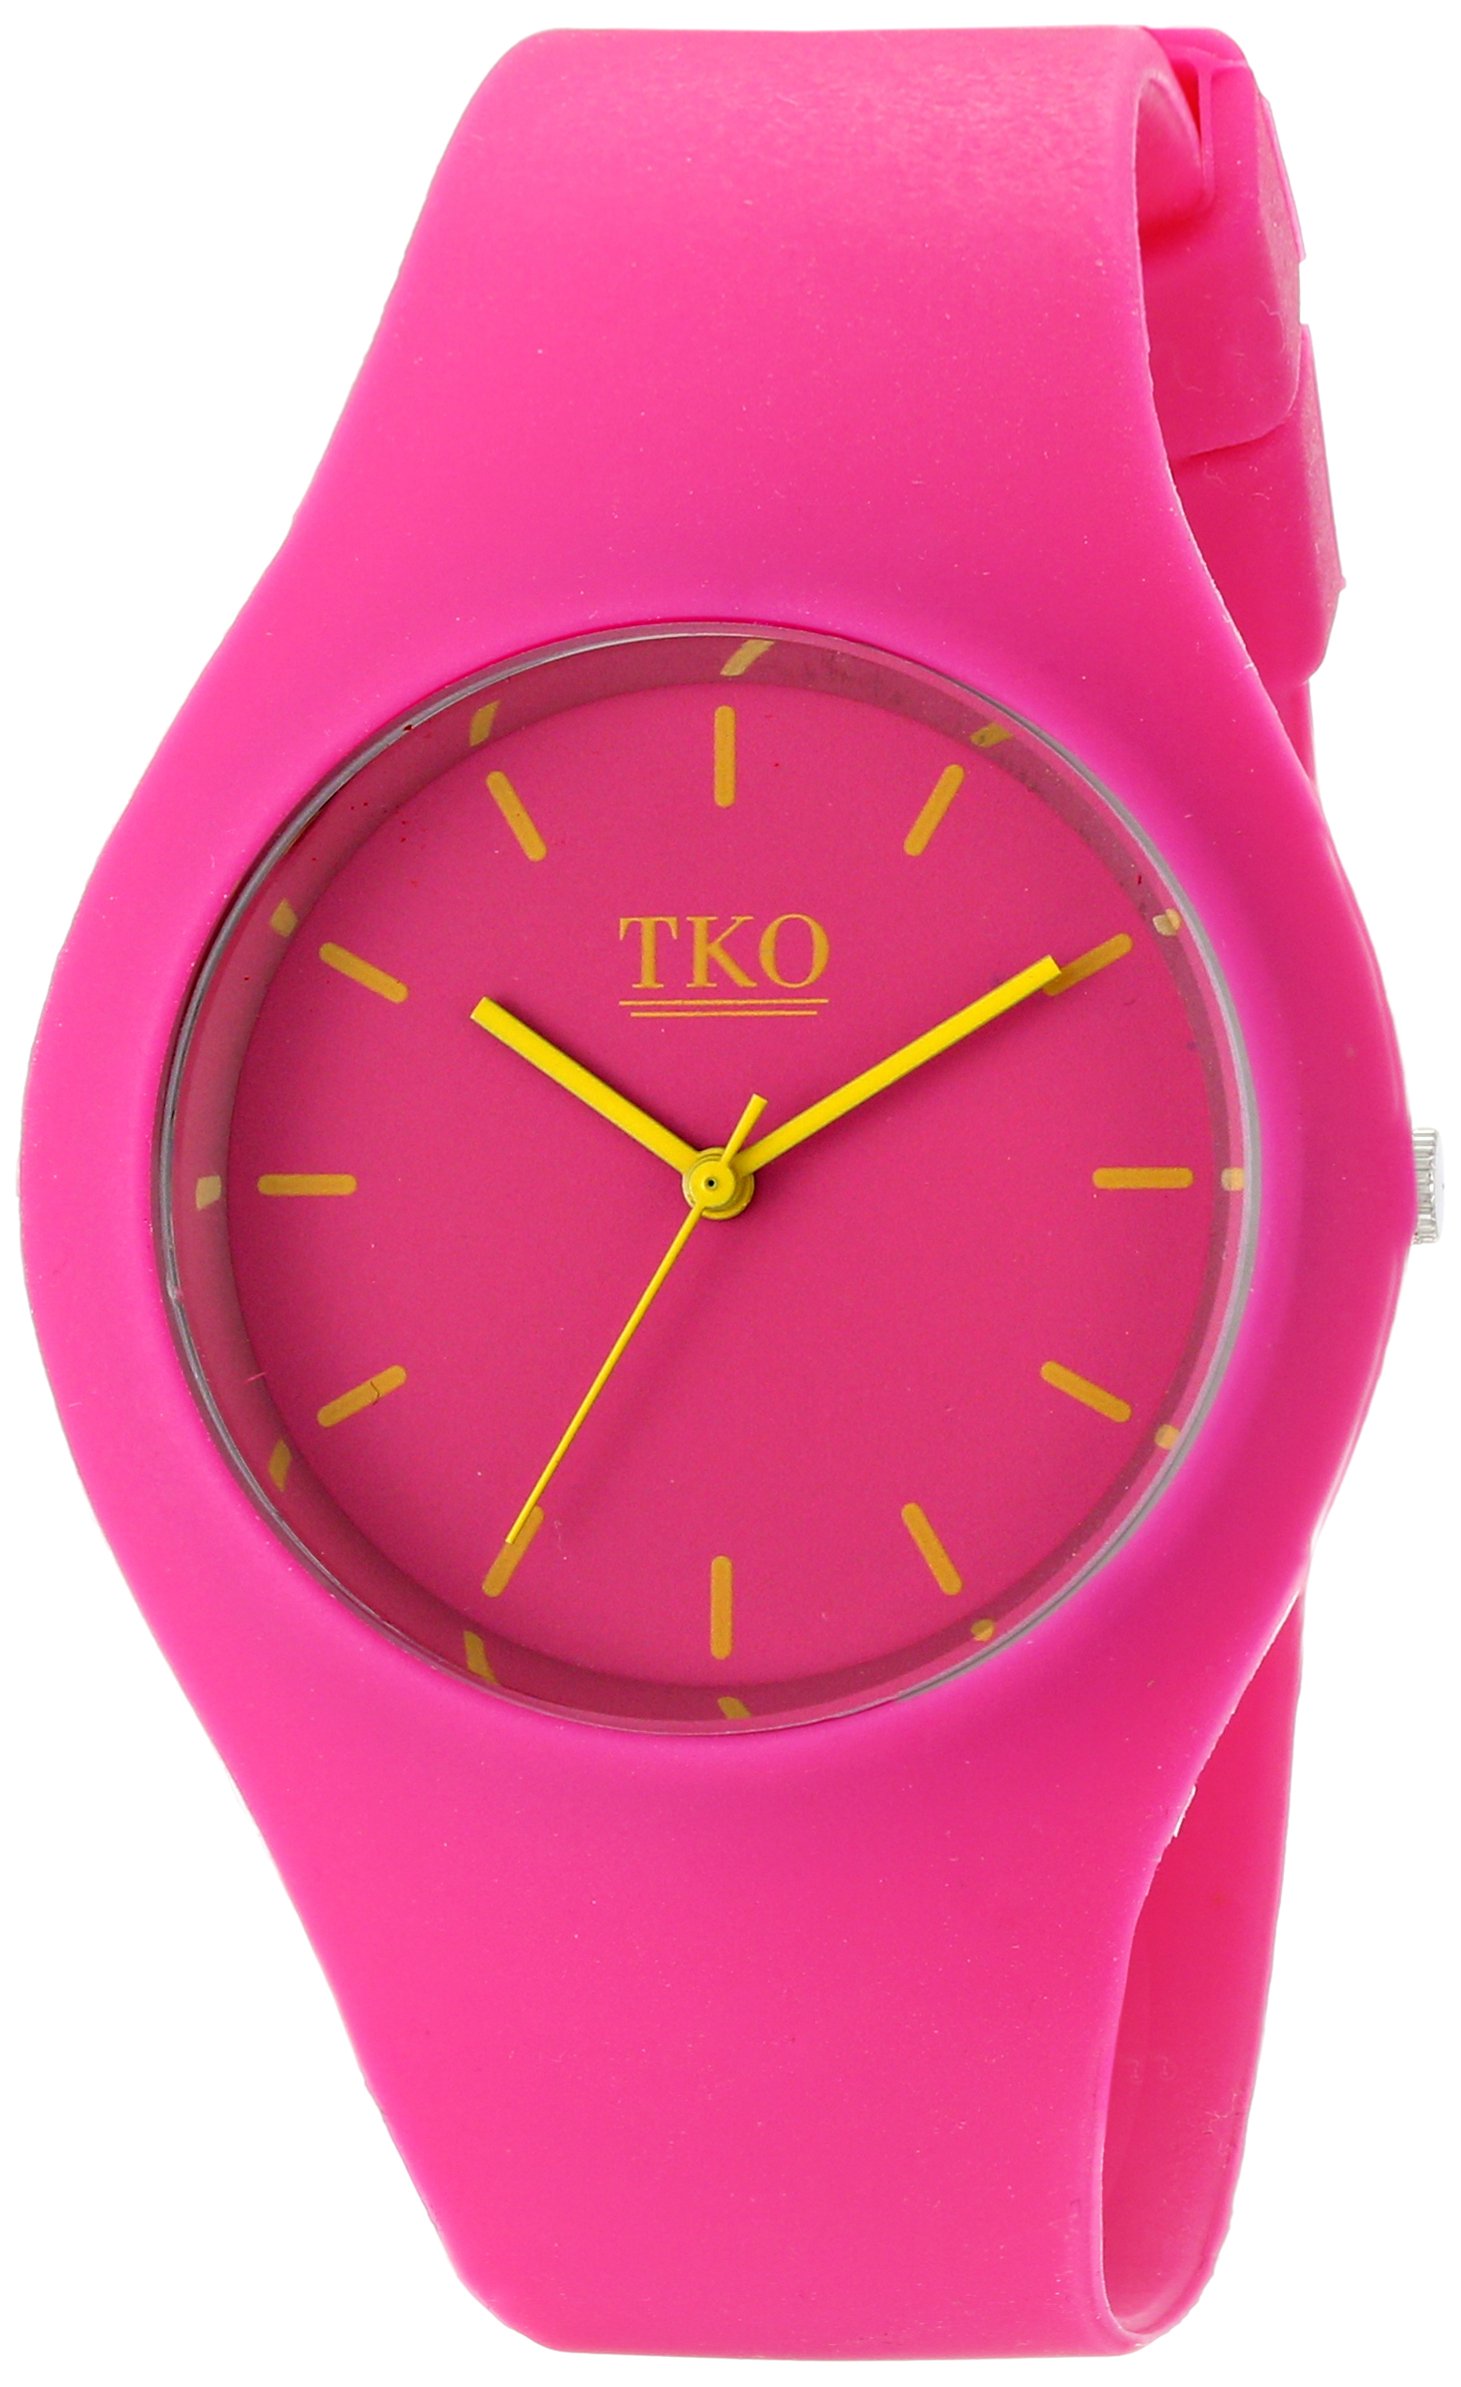 TKO Unisex Sport Watch with Rubber Band